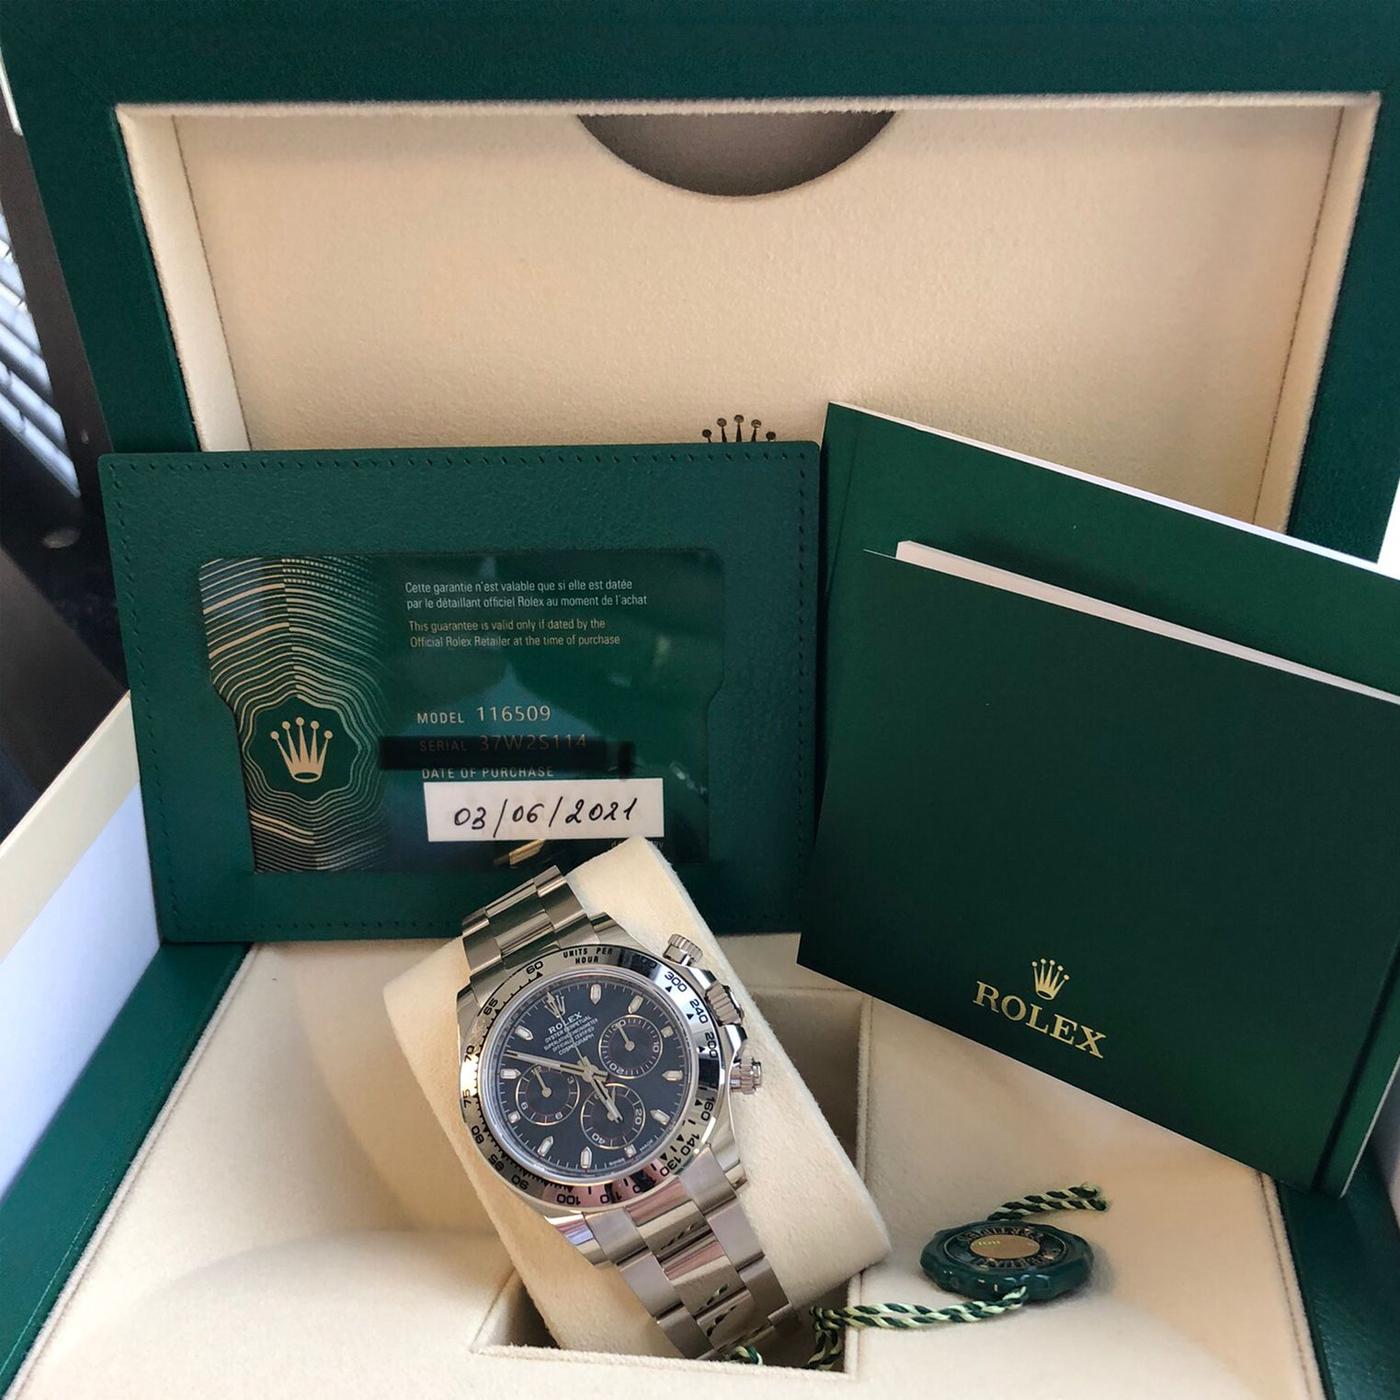 Rolex Daytona Oyster Perpetual Cosmograph 18k White Gold Blue Dial 116509 2